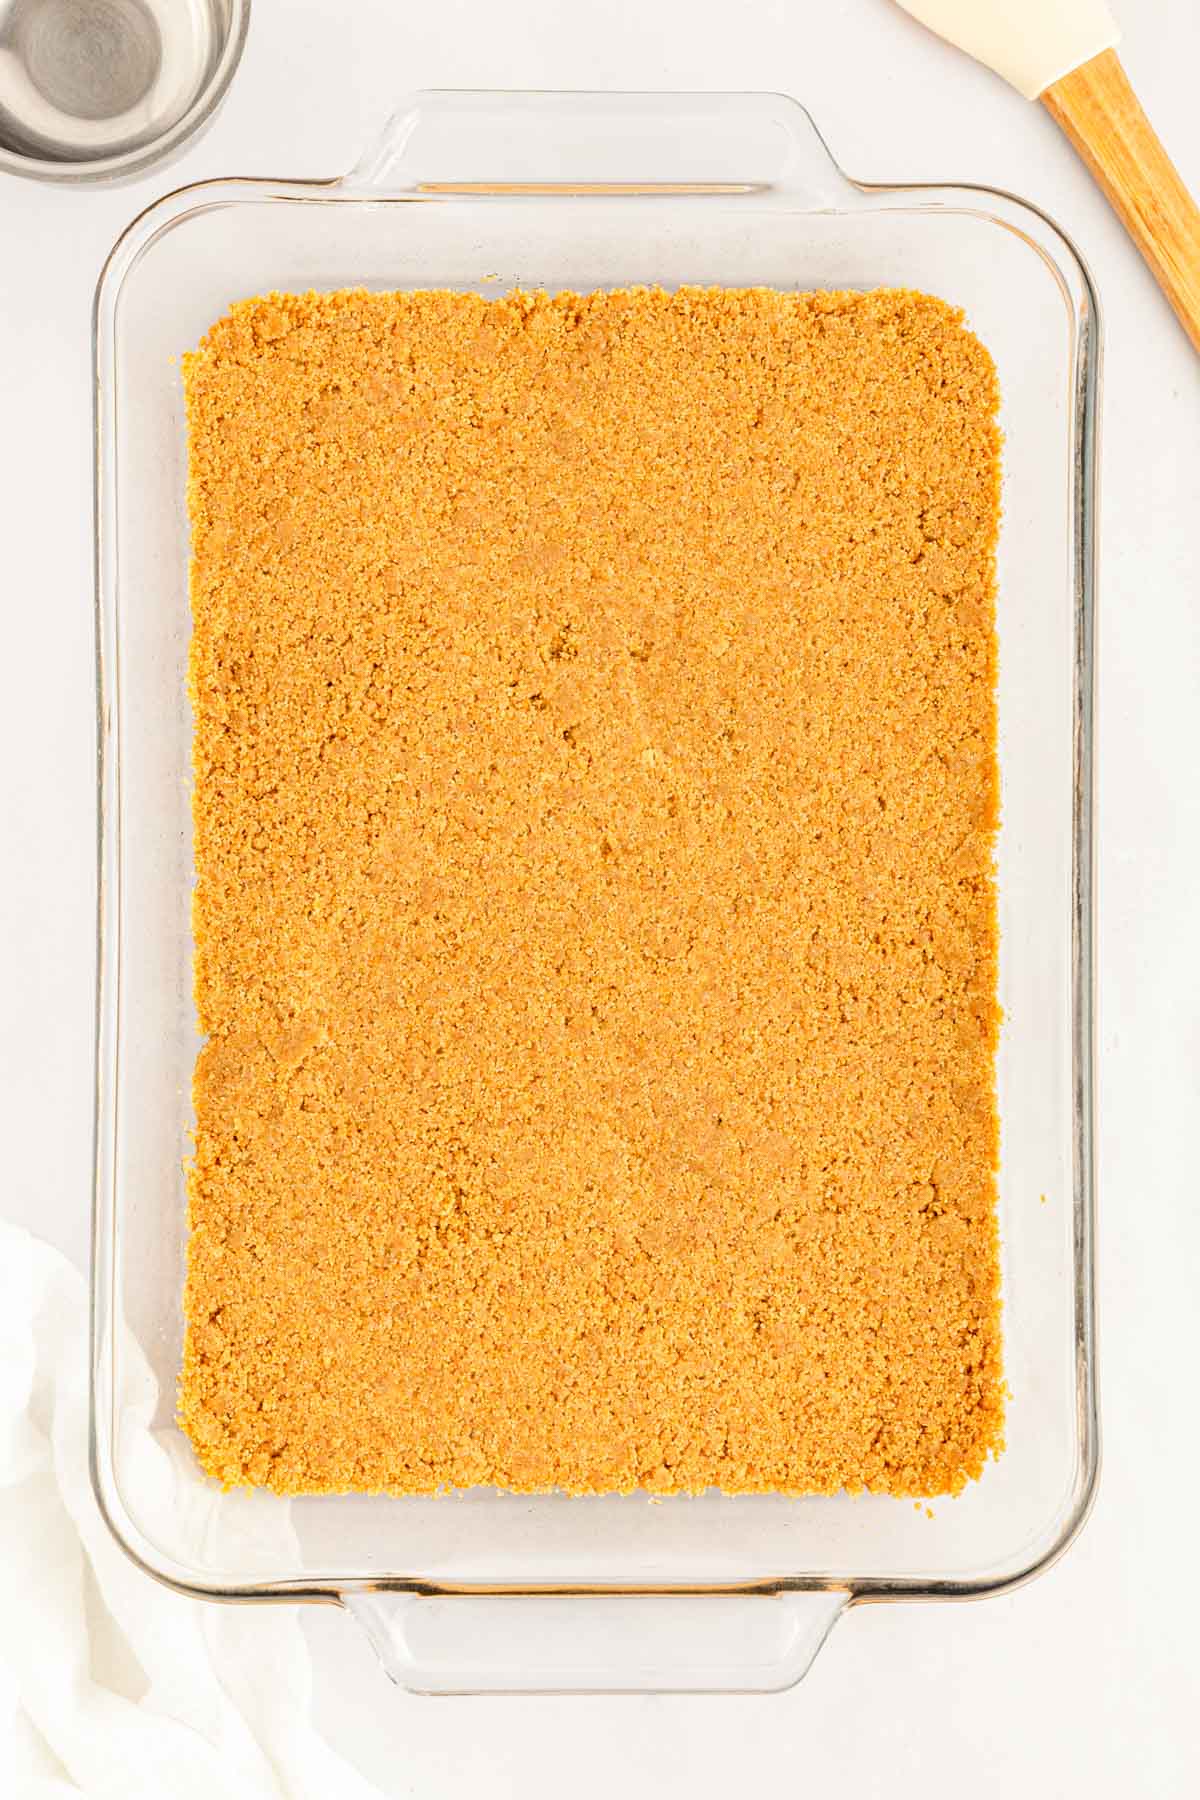 A layer of graham cracker crumbs in a glass pan.